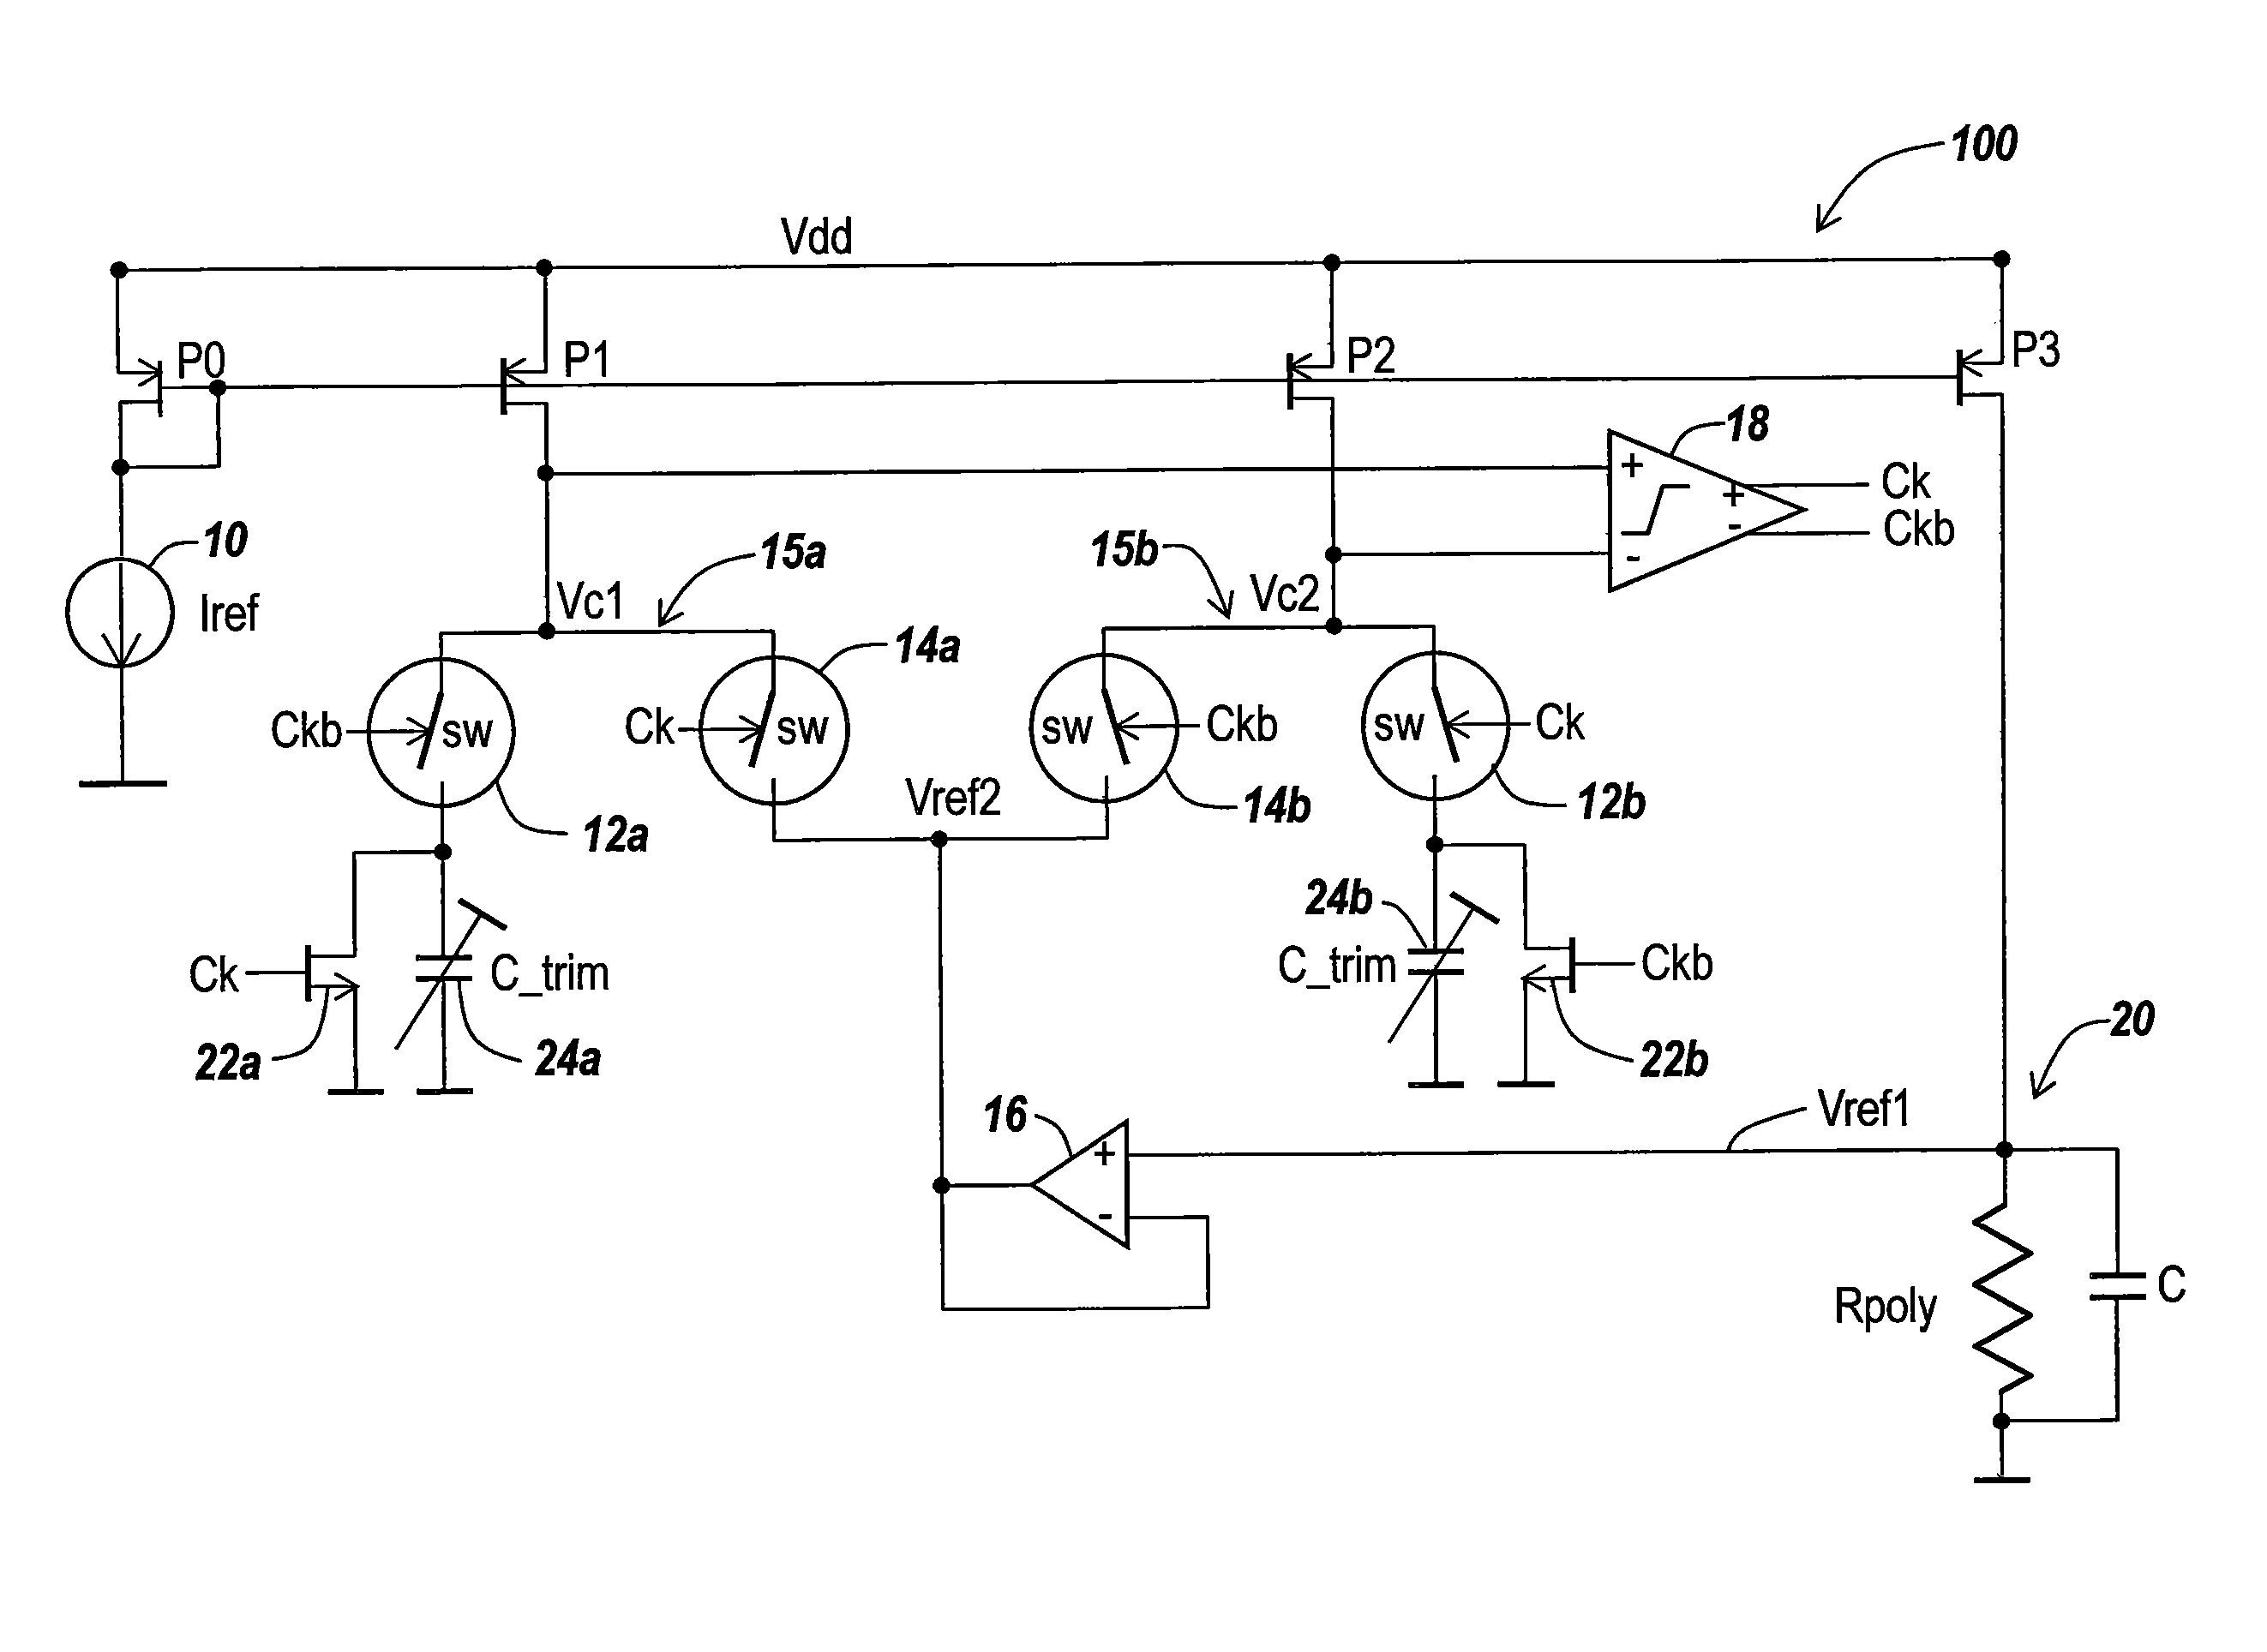 Integrated circuit devices having oscillator circuits therein that support fixed frequency generation over process-voltage-temperature (PVT) variations